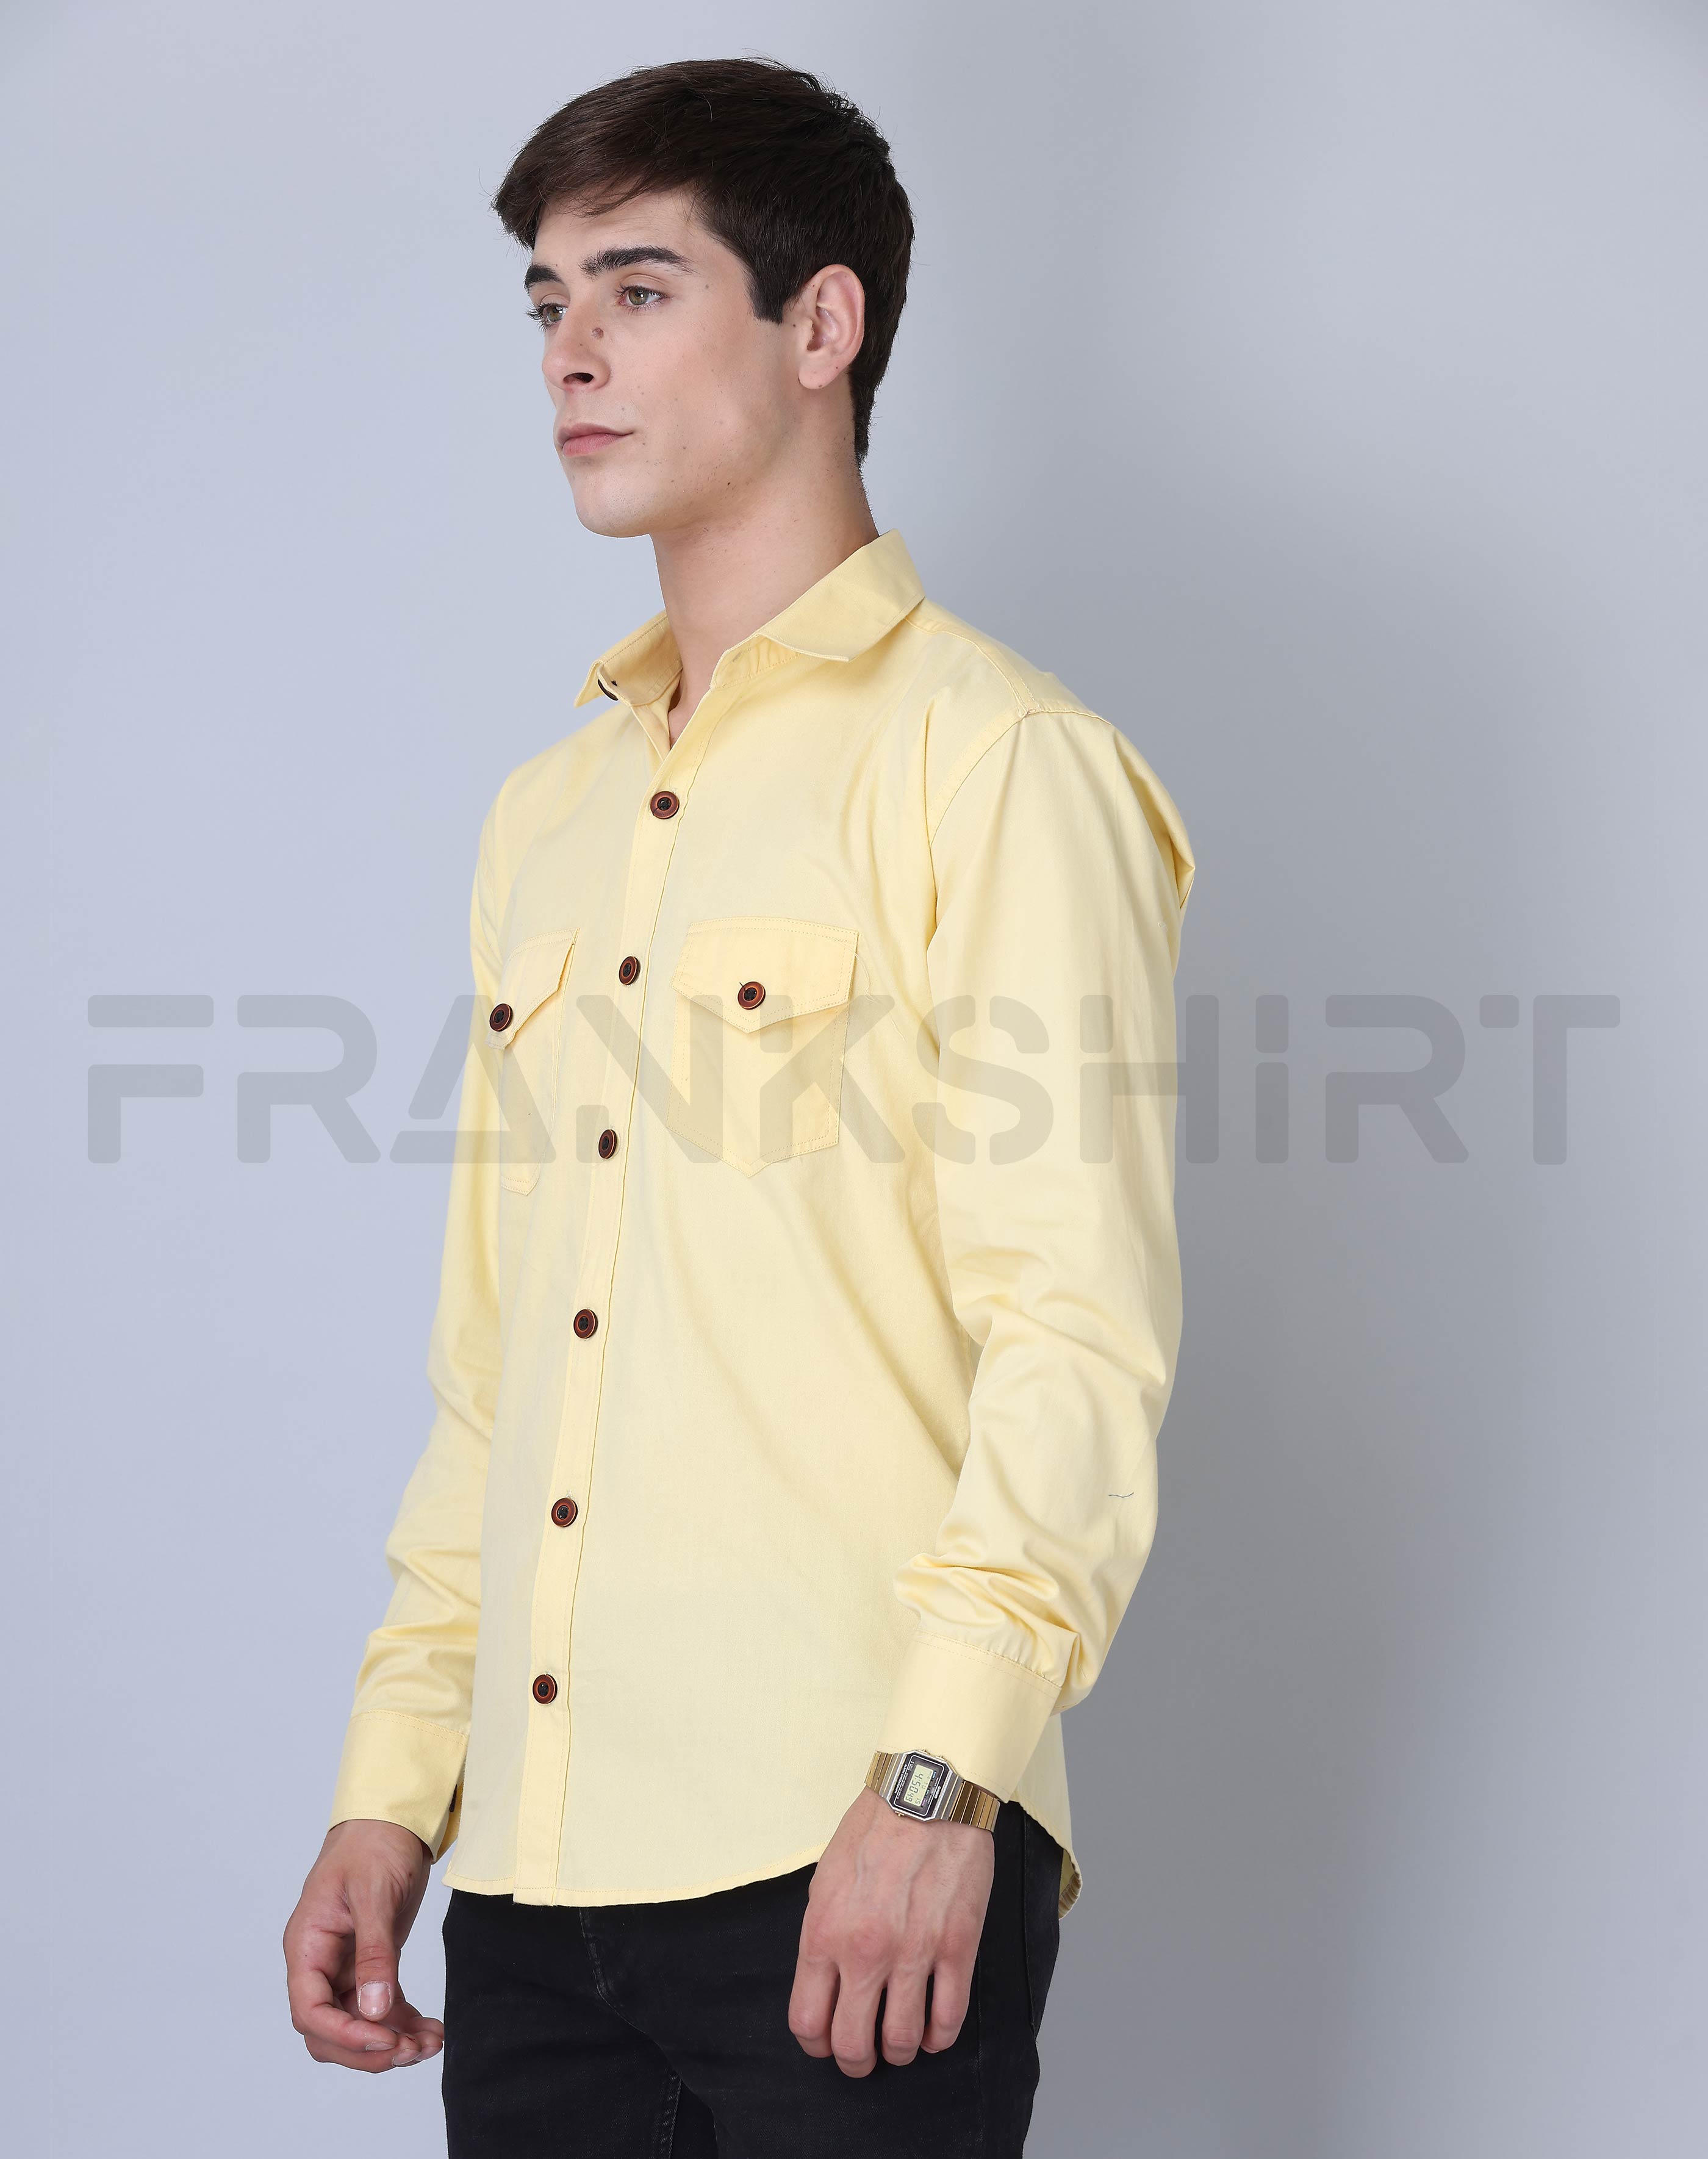 Frankshirt Double Pocket Yellow Solid Tailored Fit Cotton Casual Shirt for Man